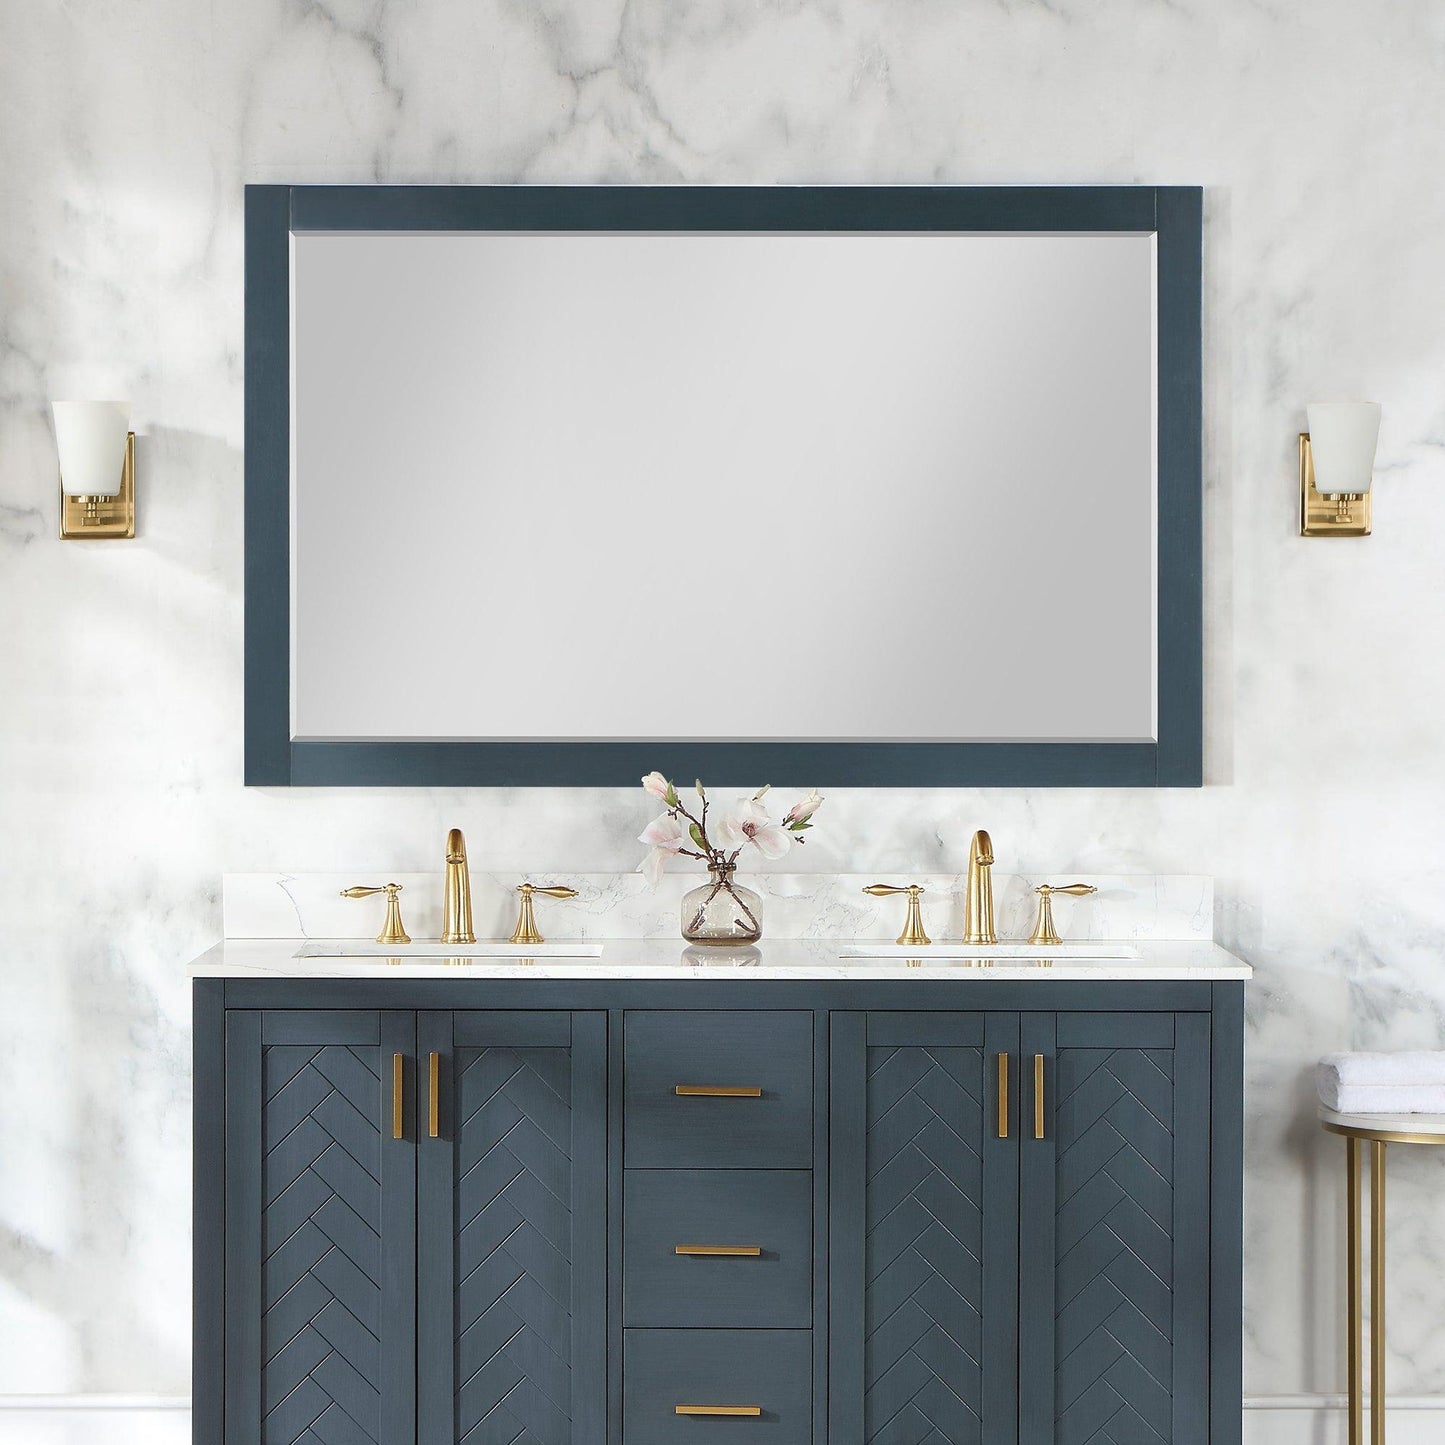 Altair Maribella 57" x 36" Rectangle Classical Blue Wood Framed Wall-Mounted Mirror